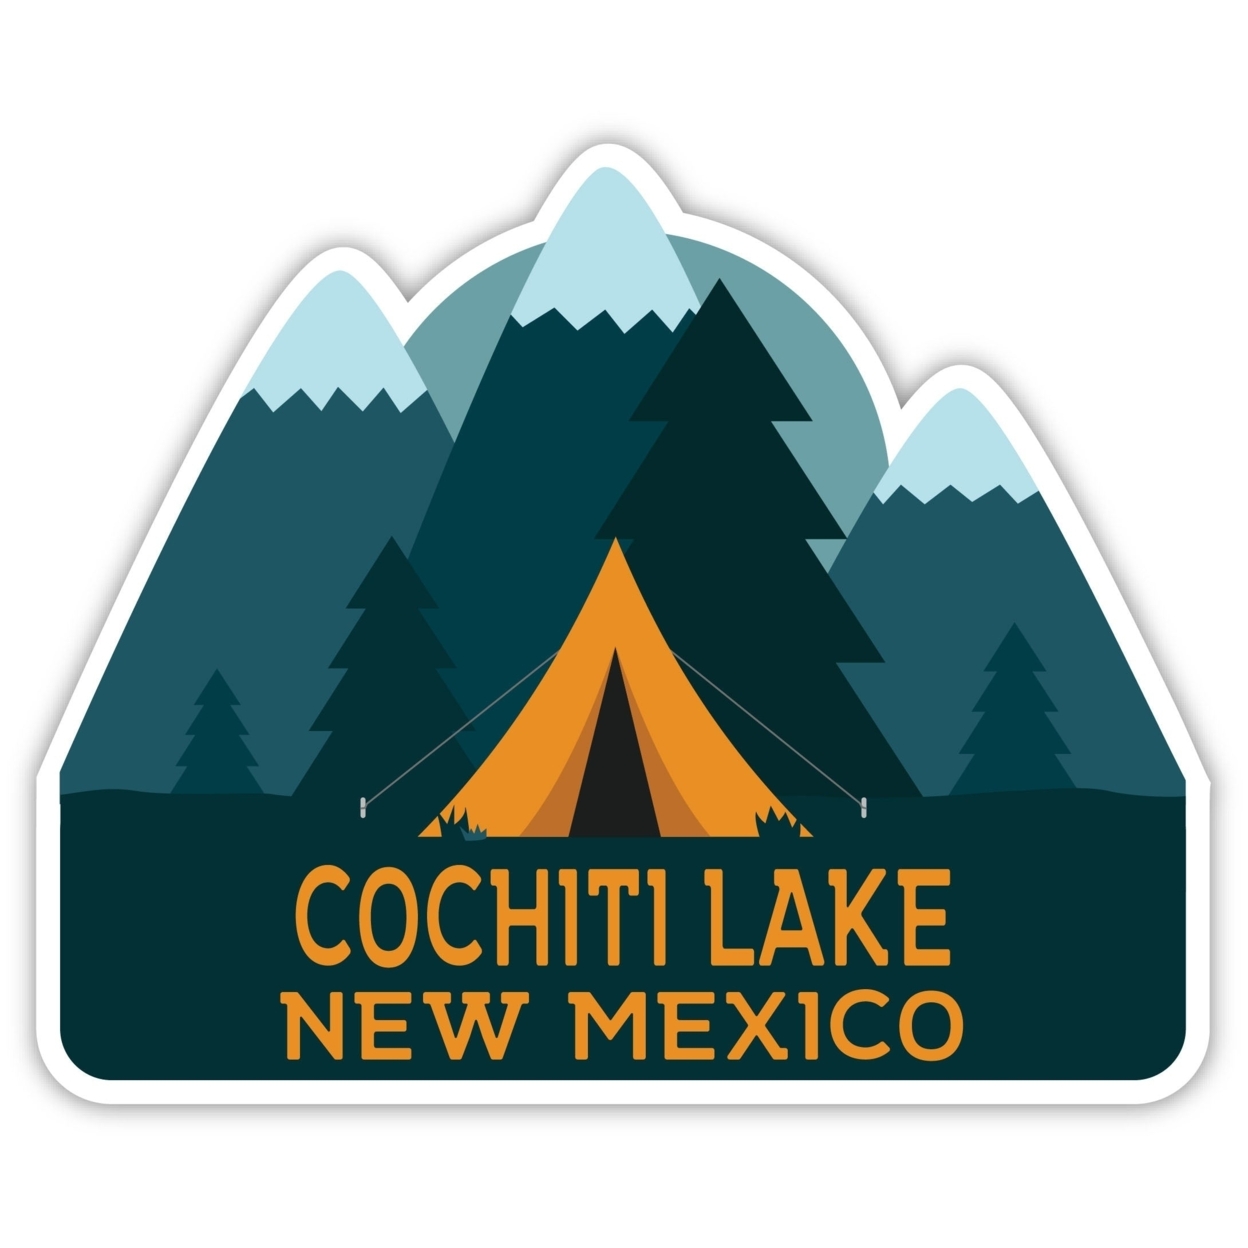 Cochiti Lake New Mexico Souvenir Decorative Stickers (Choose Theme And Size) - 4-Pack, 6-Inch, Tent